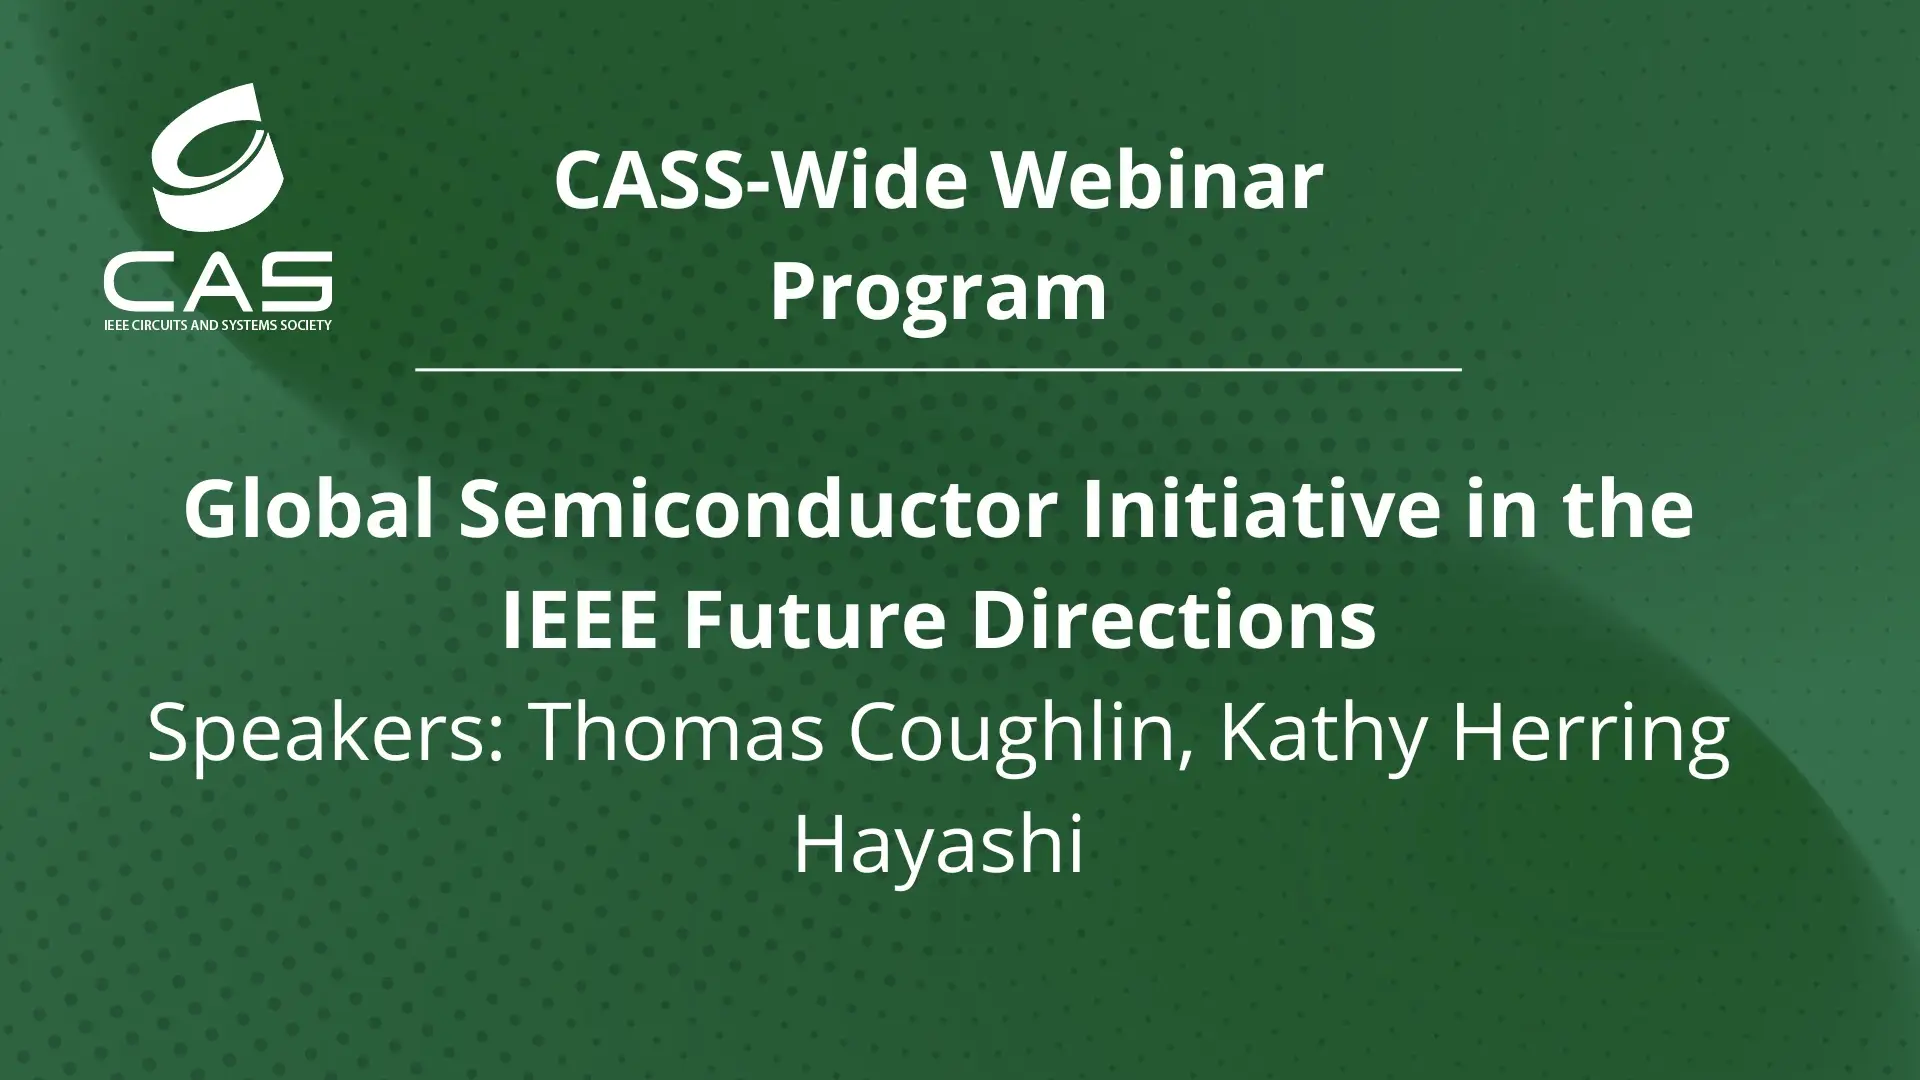 Global Semiconductor Initiative in the IEEE Future Directions